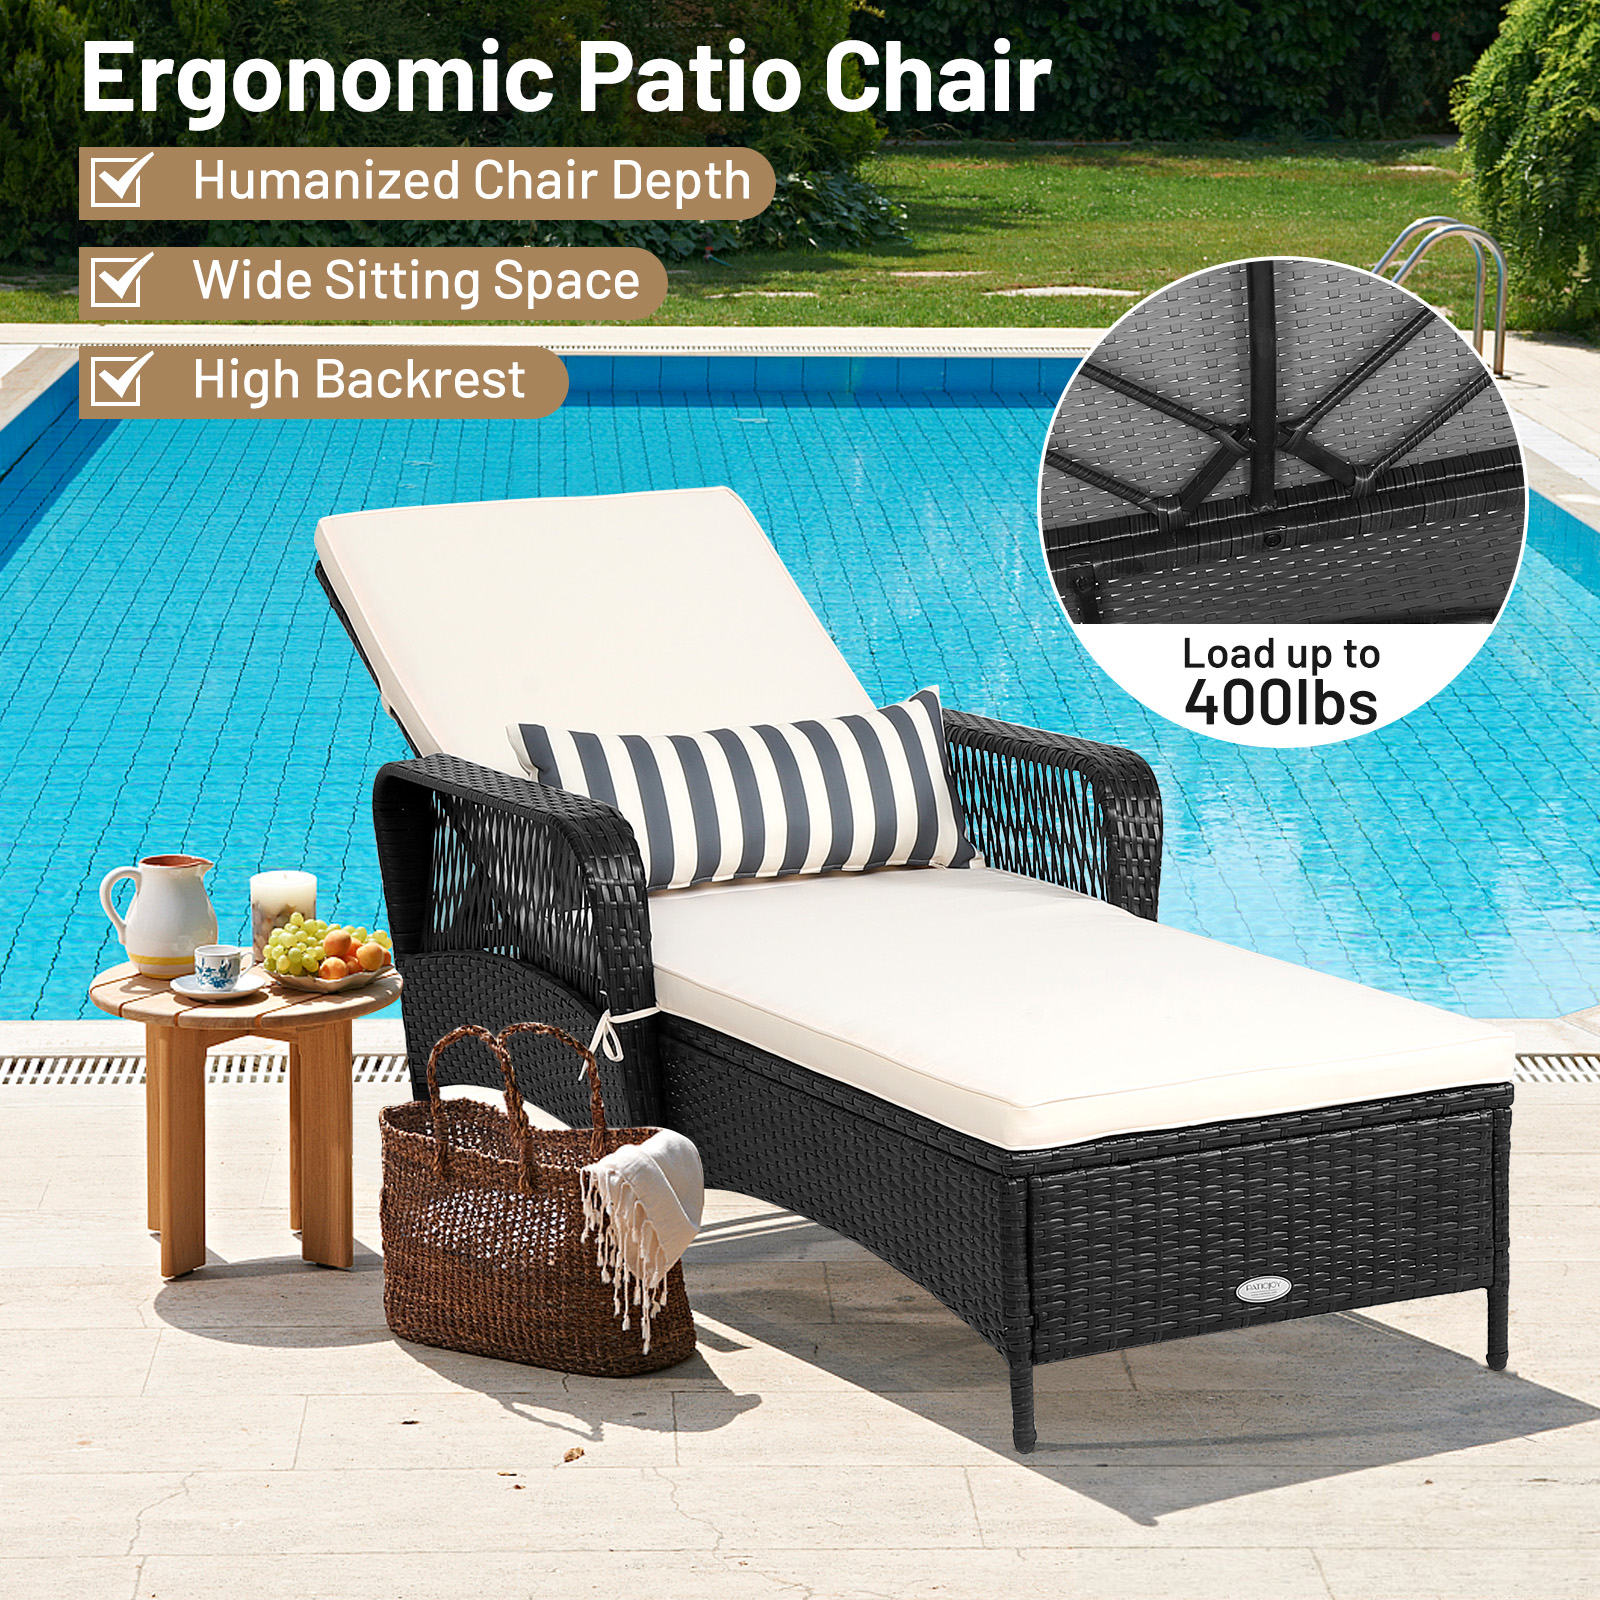 Topbuy Patiojoy Outdoor Chaise Rattan Lounge Chair Patio Reclining Chair w/6 Positions Adjustable Backrest